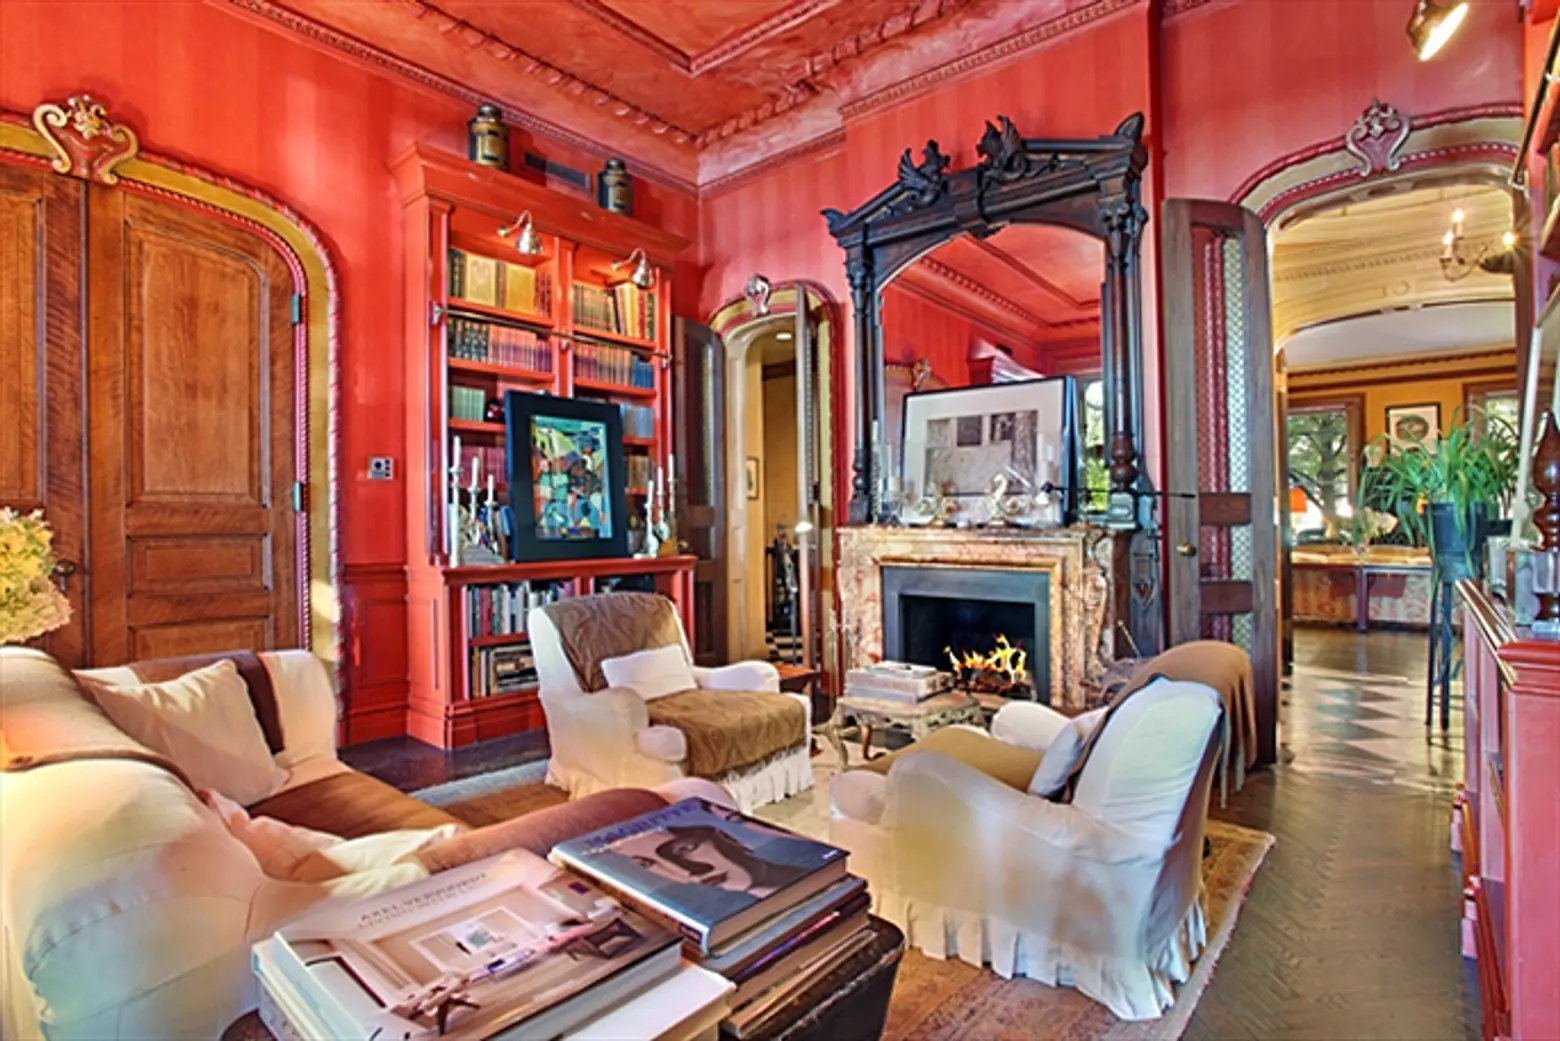 3 pierrepont place, brooklyn's most expensive home